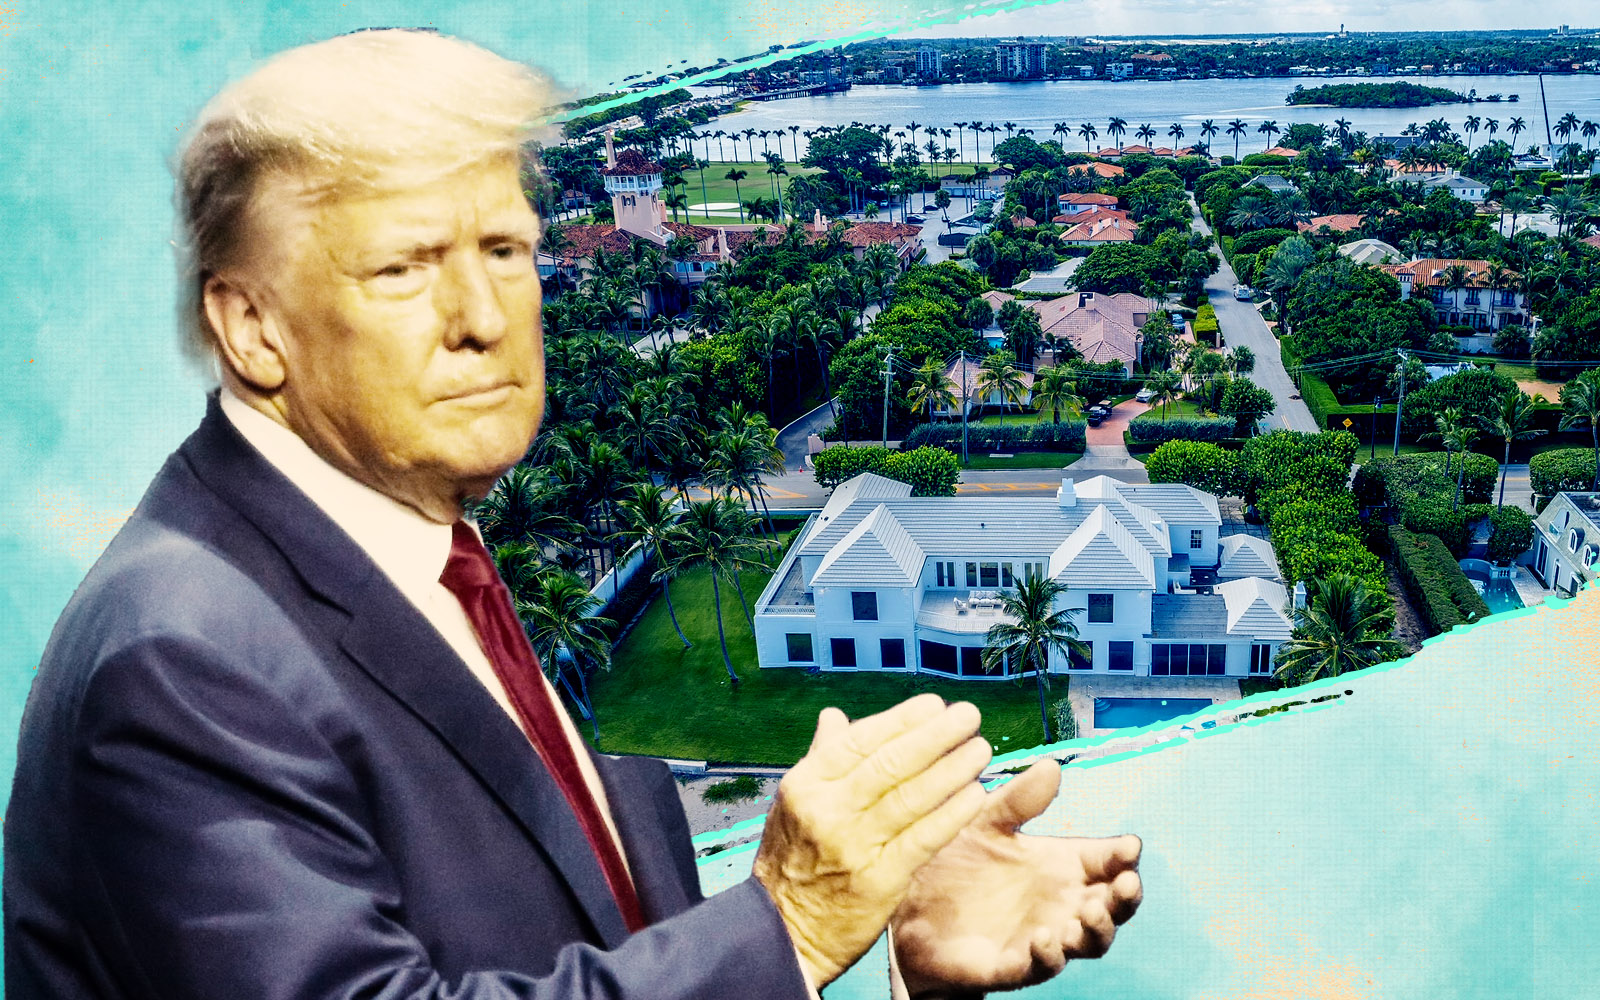 Donald Trump’s Palm Beach estate is back on the market for rent at $195K a month